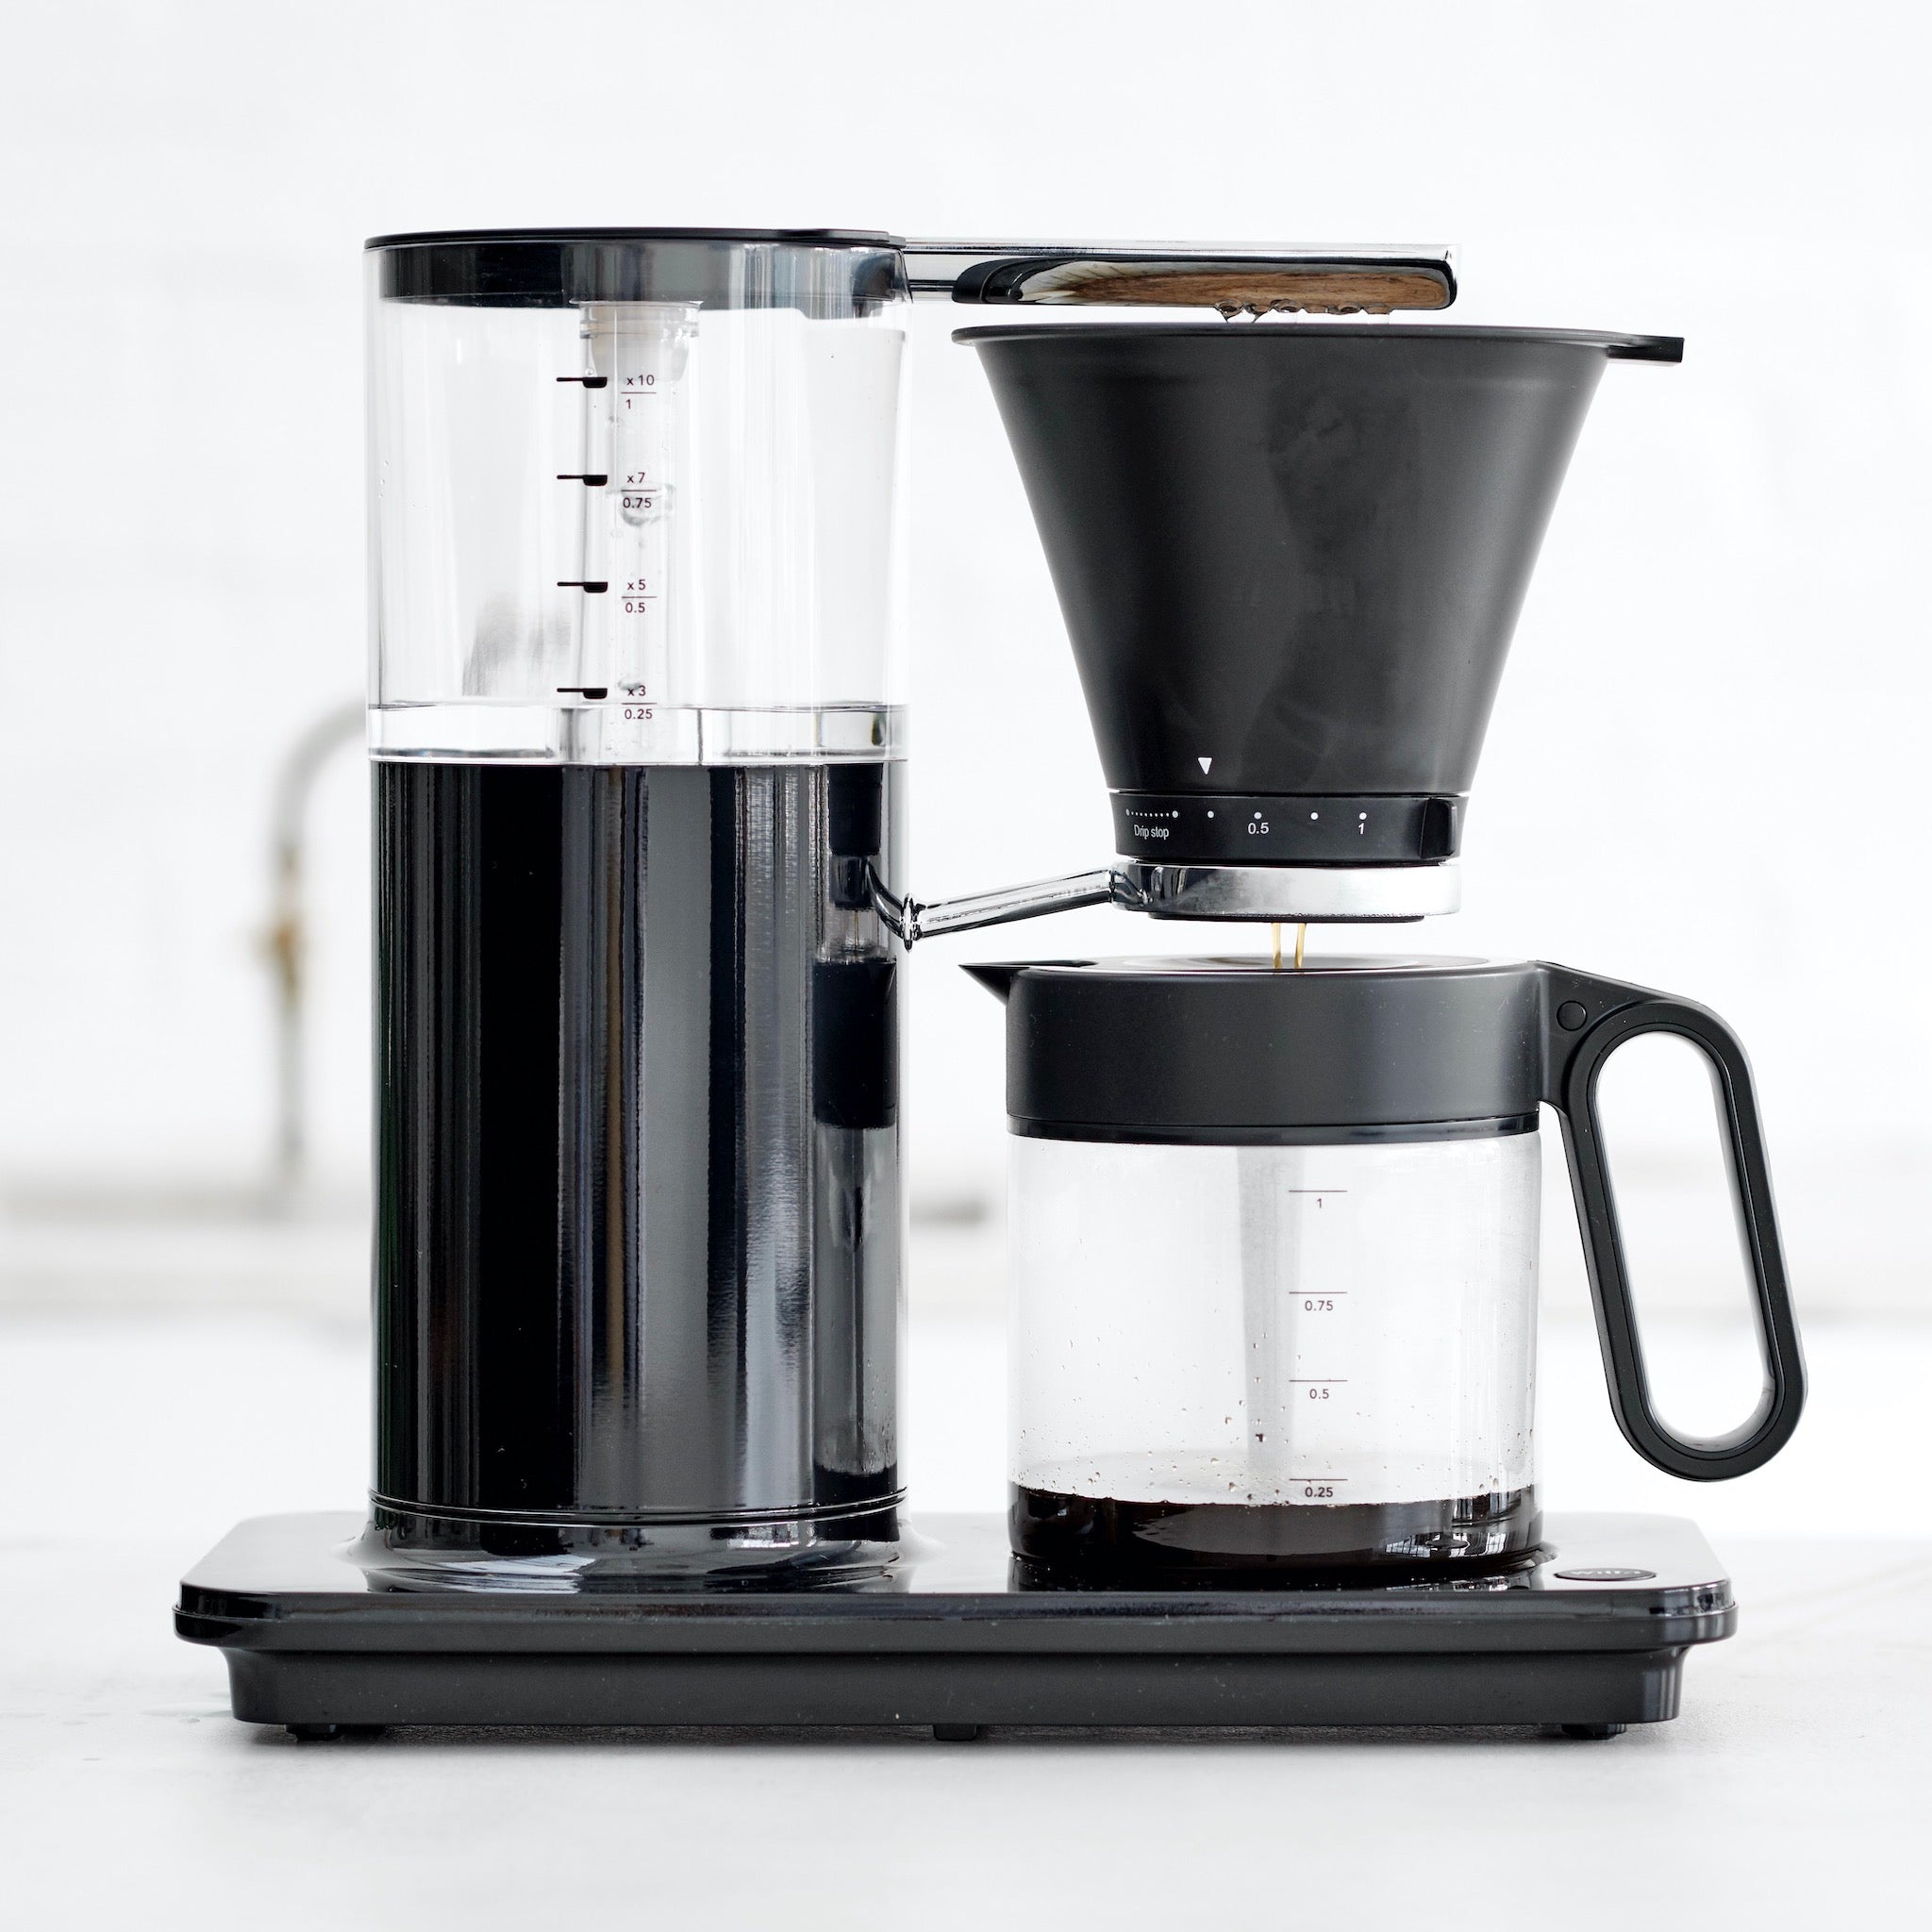  Customer reviews: Wilfa Precision Automatic Coffee Brewer  (WSP-1A), Detachable Water Tank, Precise Temperature and Water Control, Hot  Warming Plate, Glass Carafe, Pour Over, Aluminum